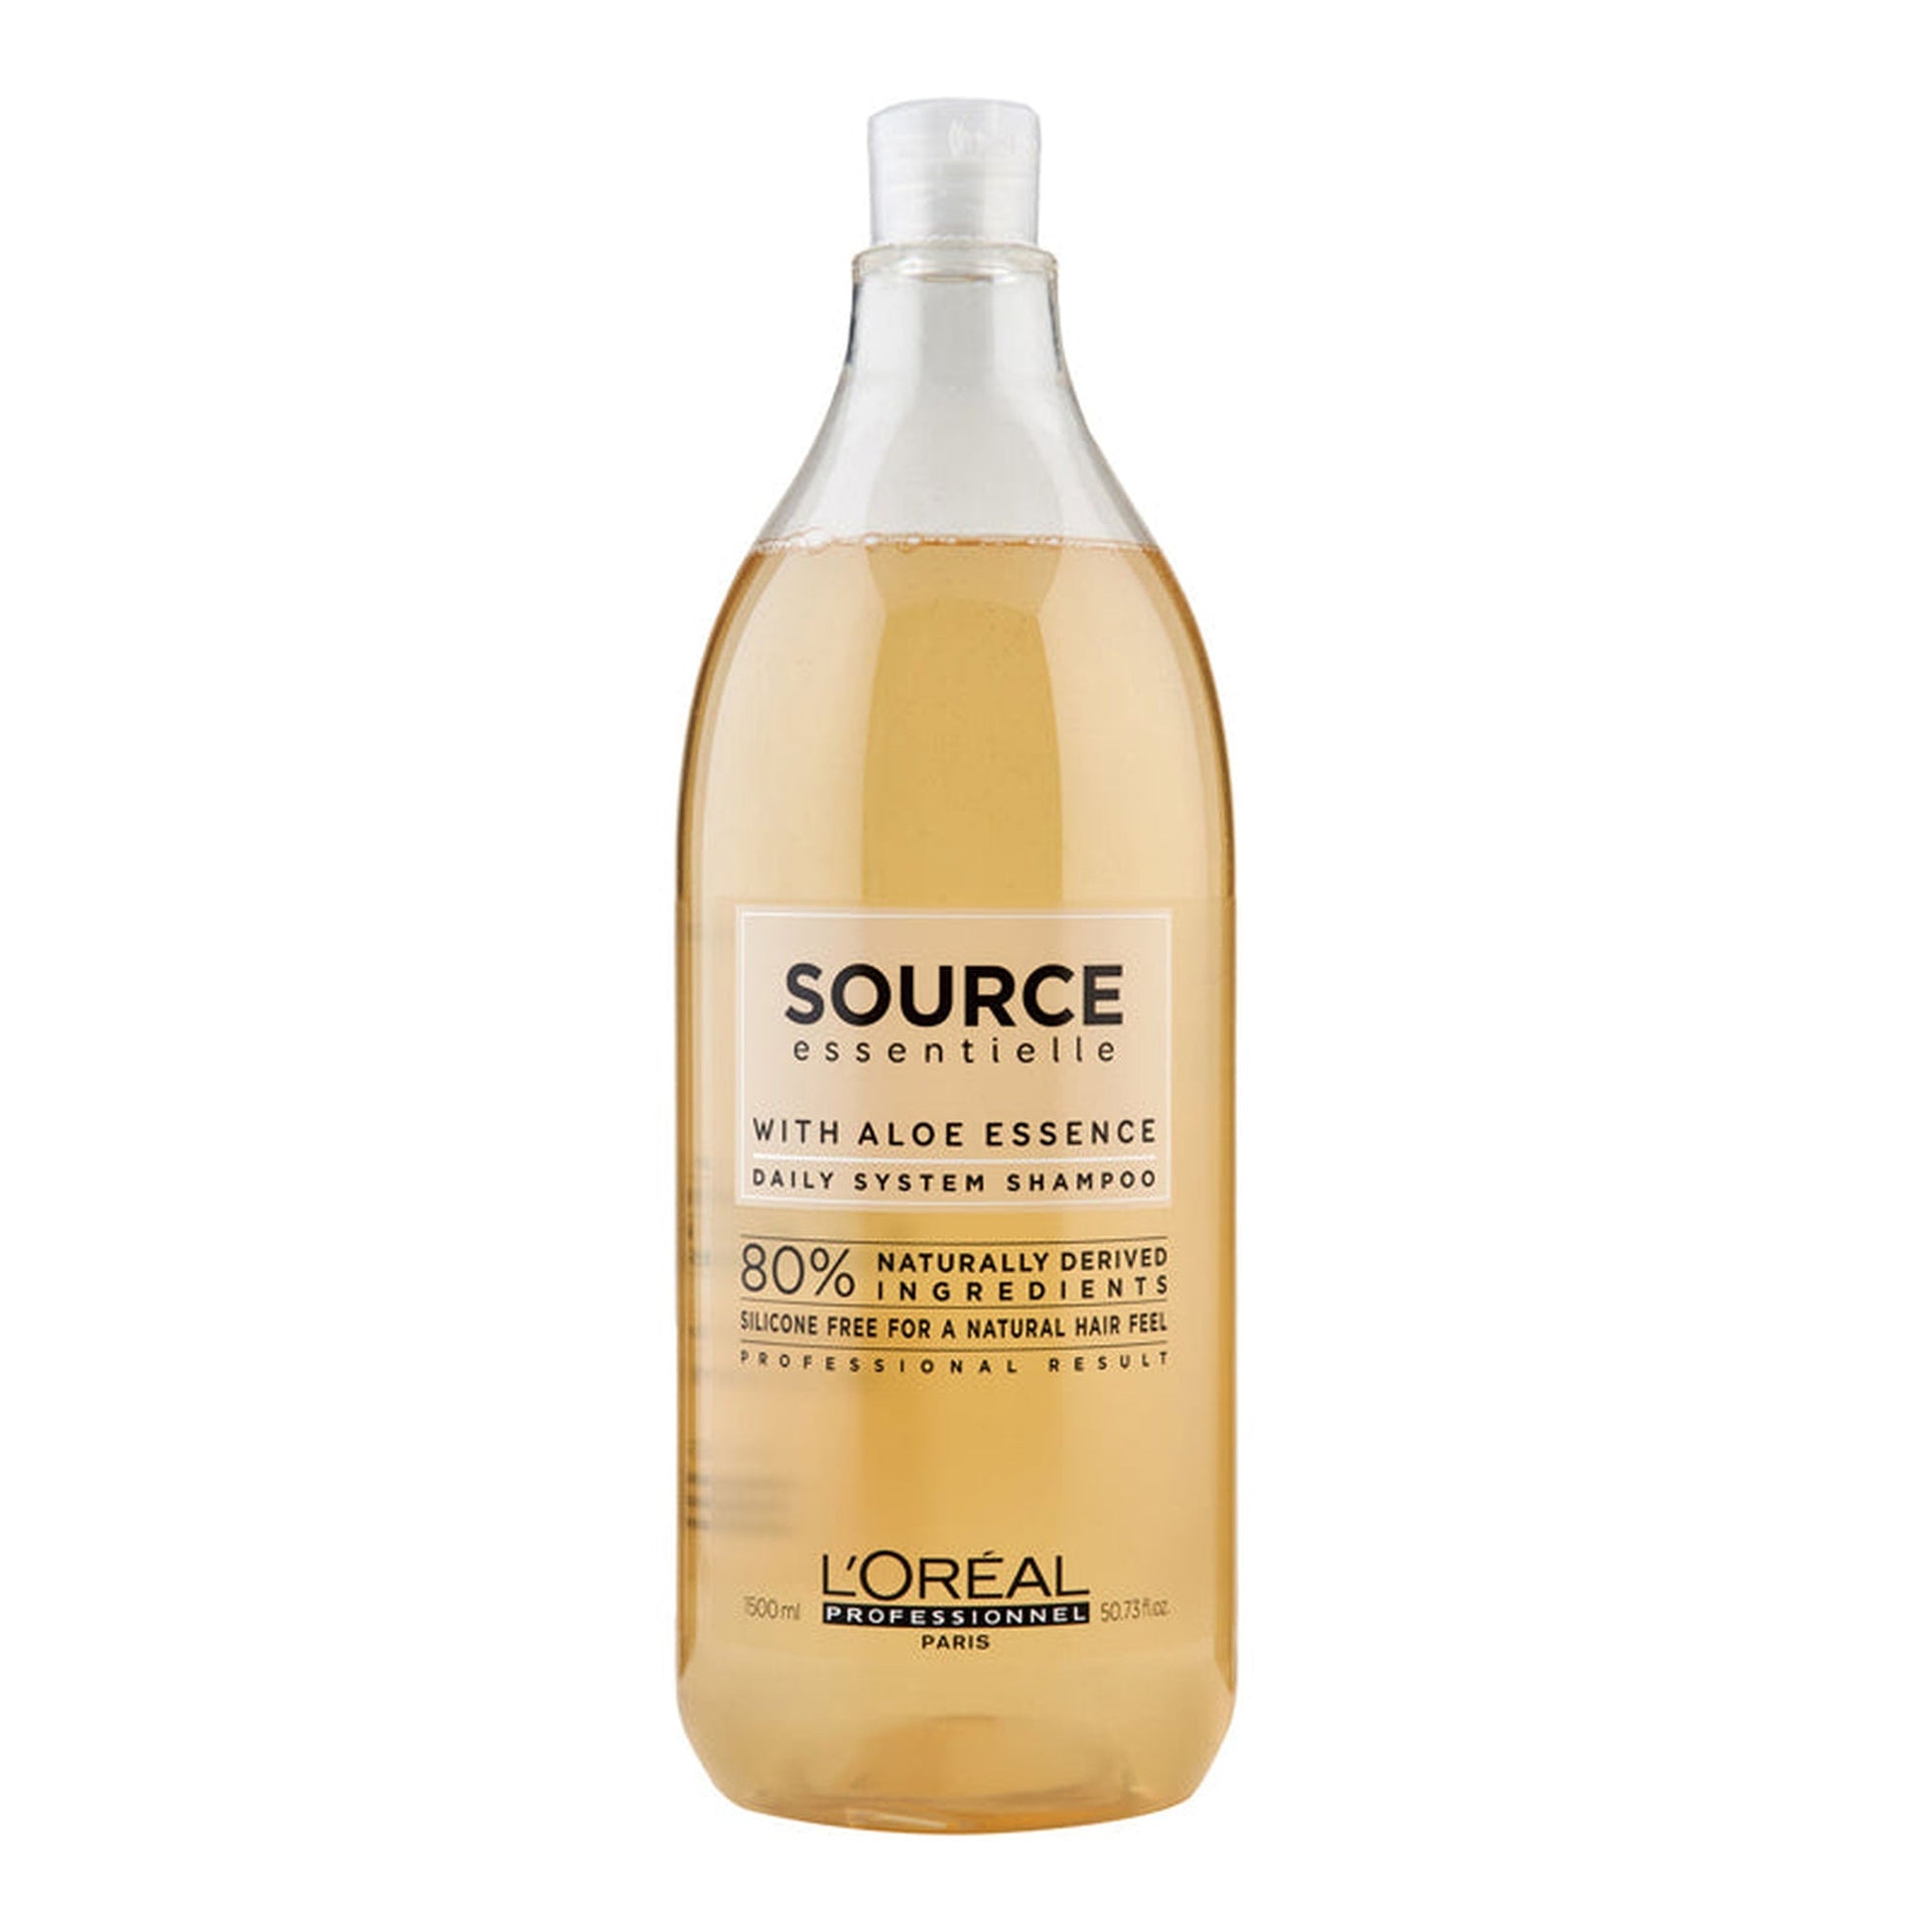 Loreal Professional Source Essentielle Daily System Shampoo 1500mL-L'Oreal-BeautyNmakeup.co.uk